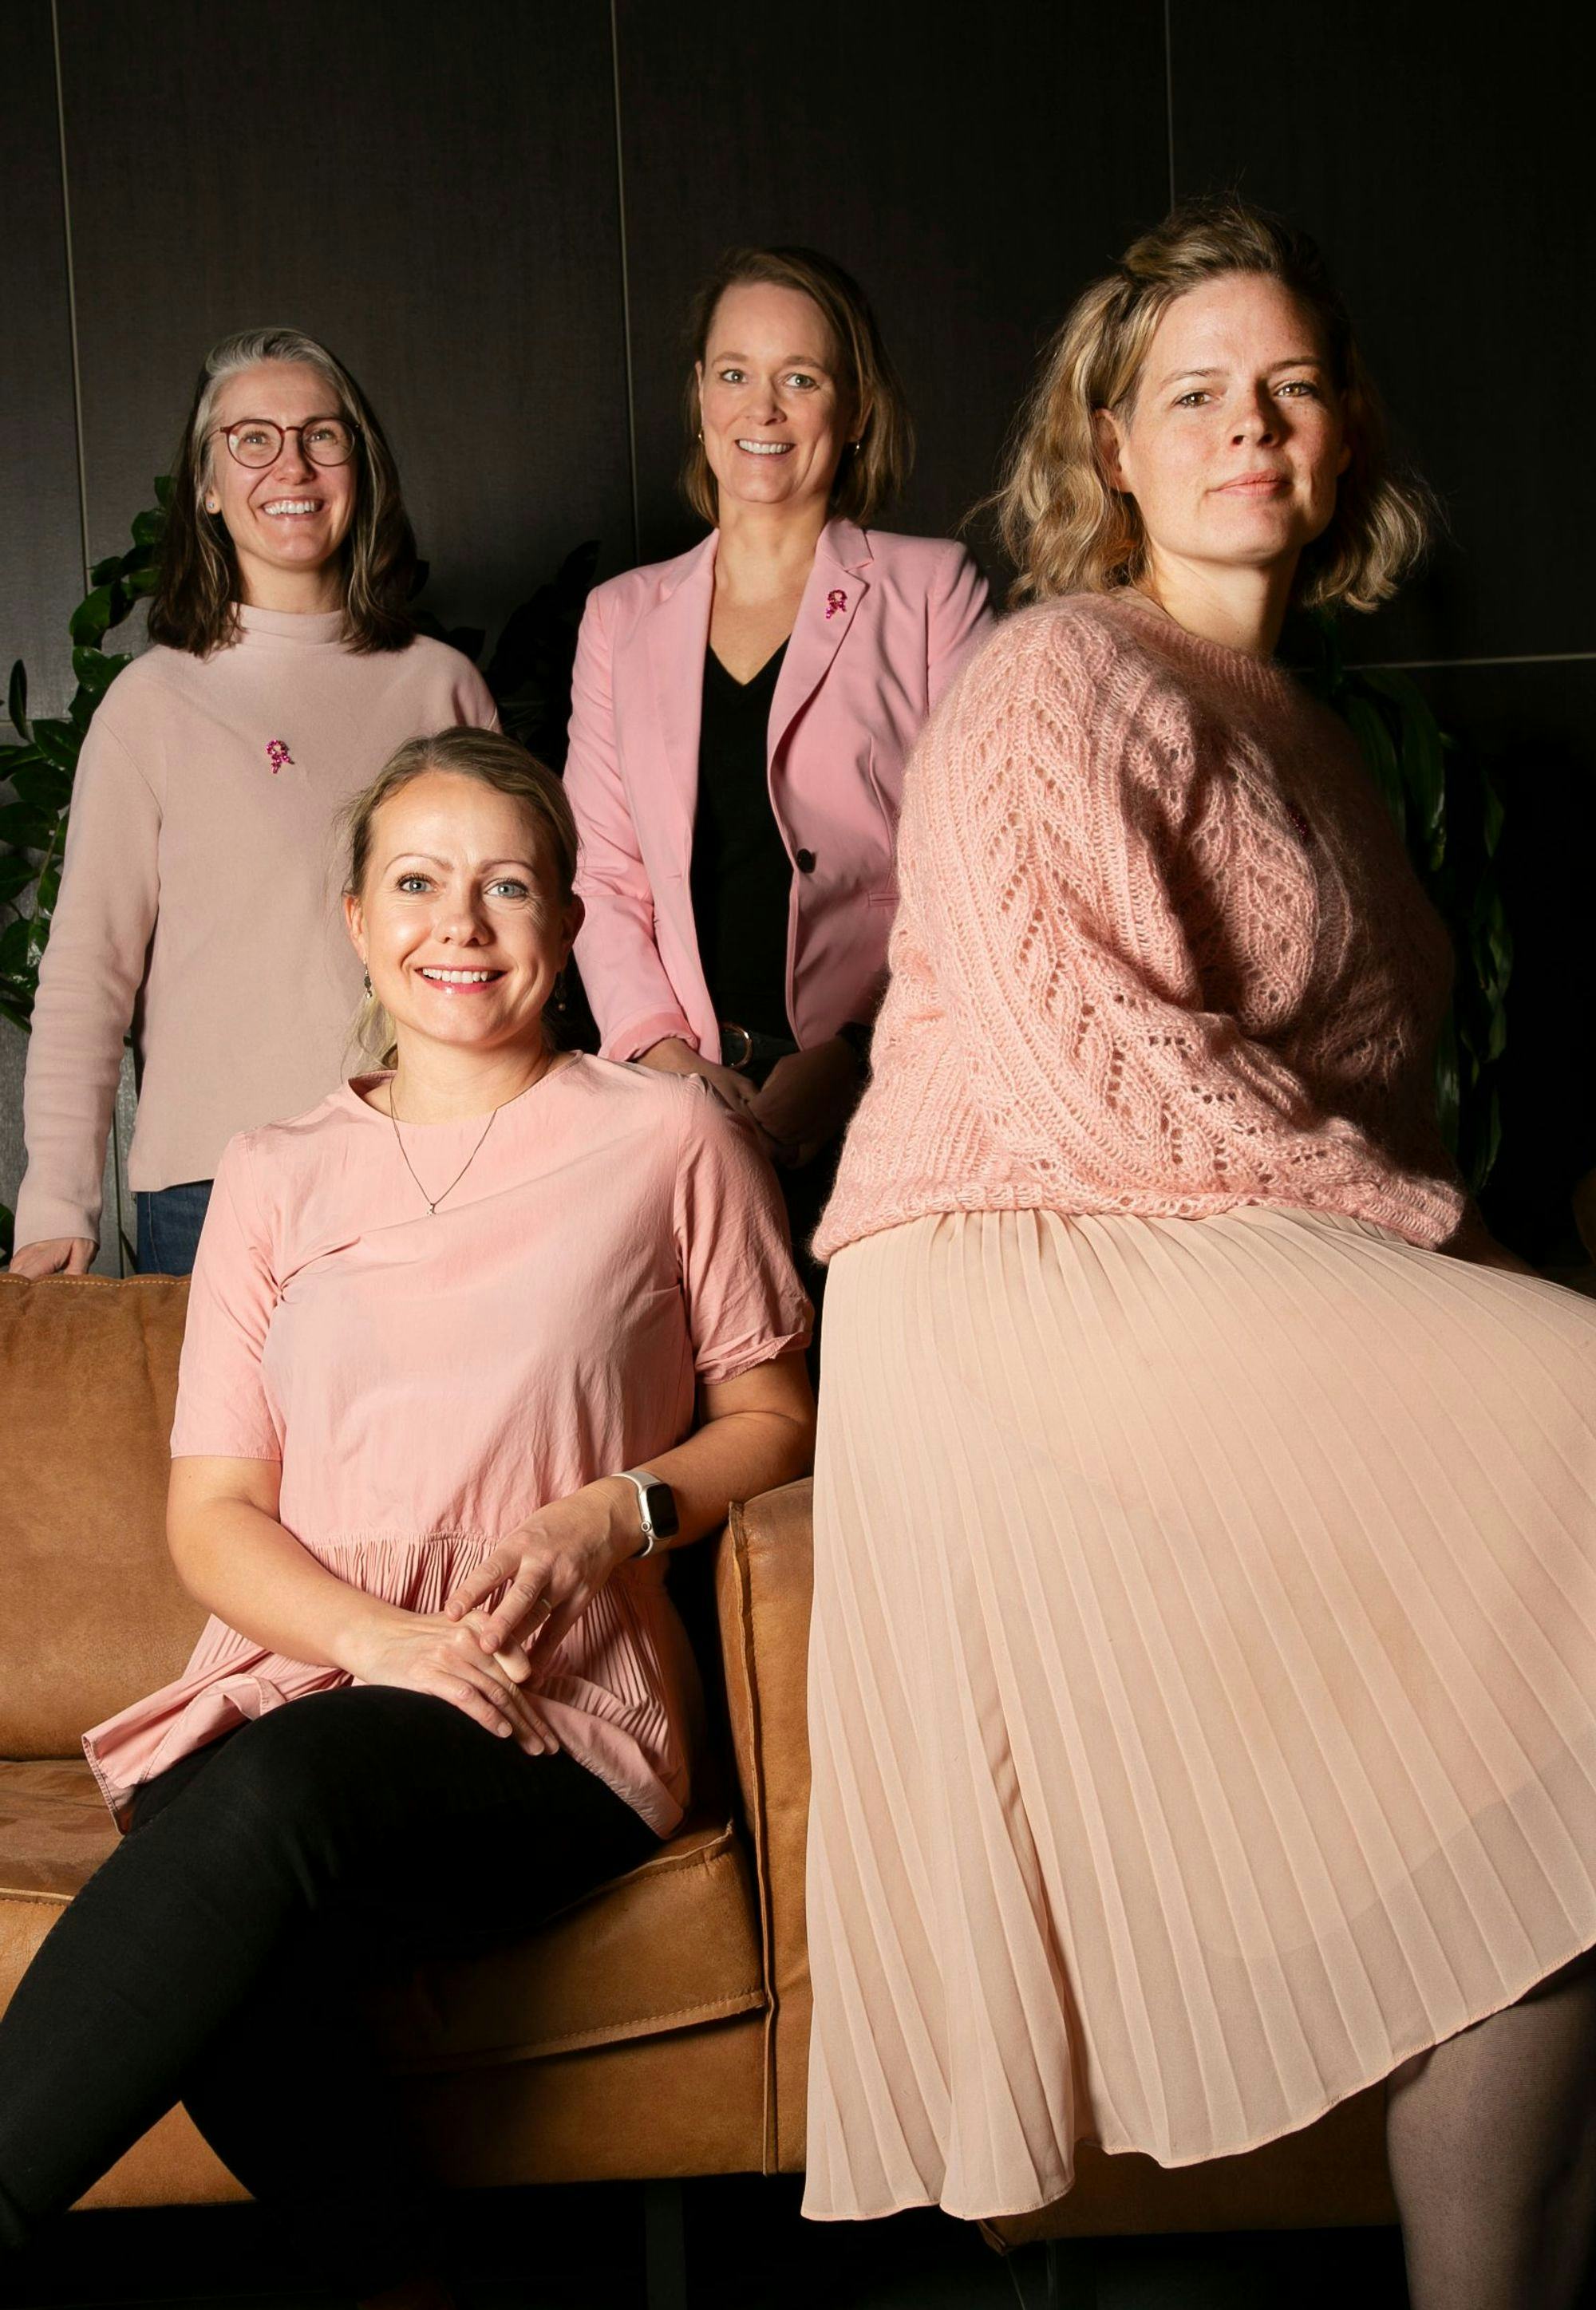 A group of four women, two standing and two seated on a leather couch, all set against a dark interior background with green foliage